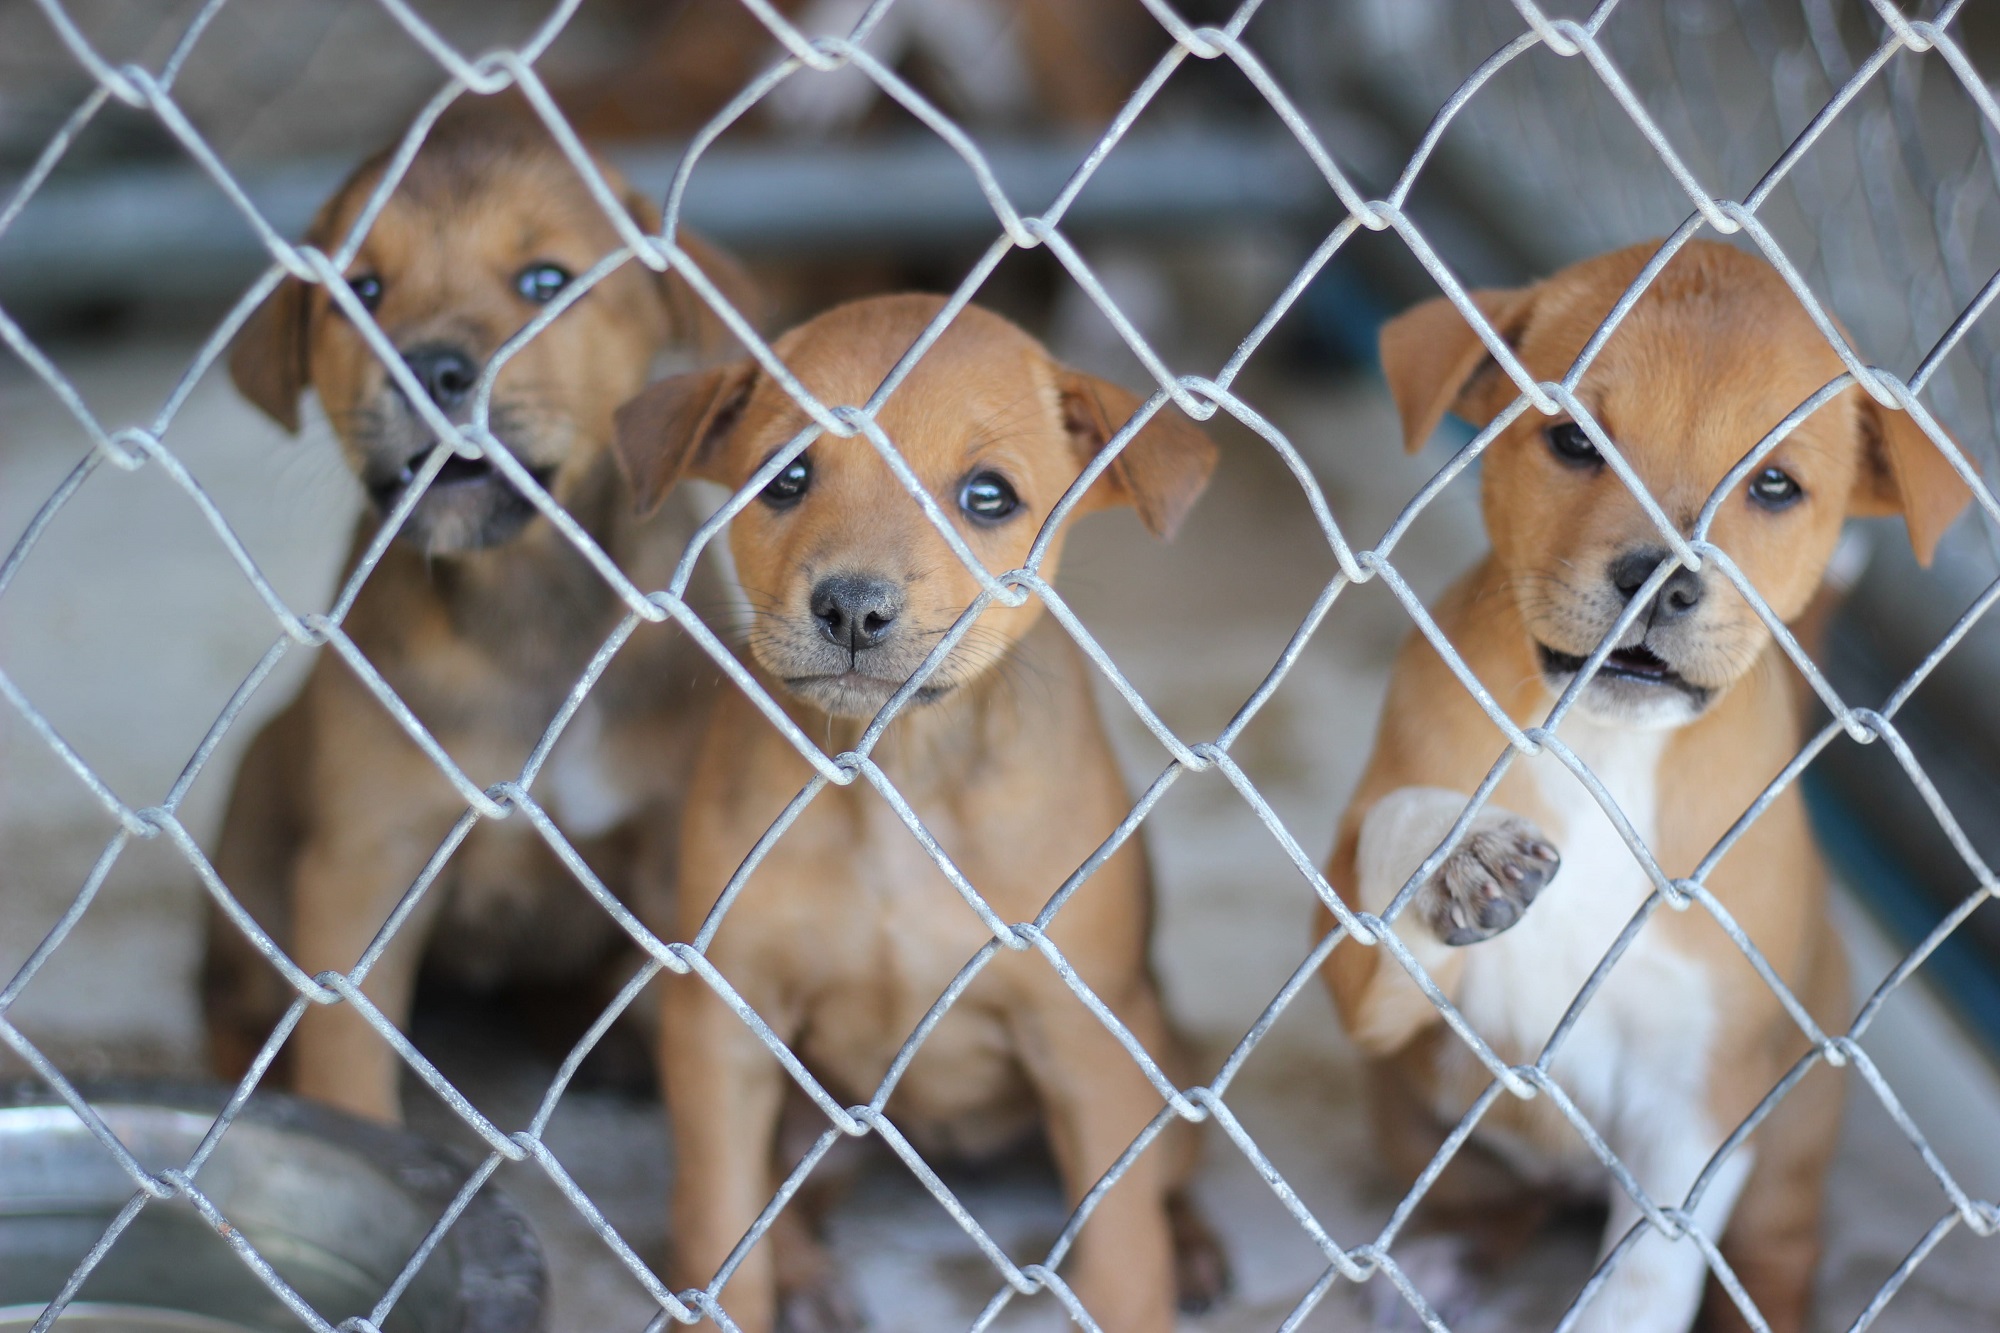 Image shows puppies at a shelter.